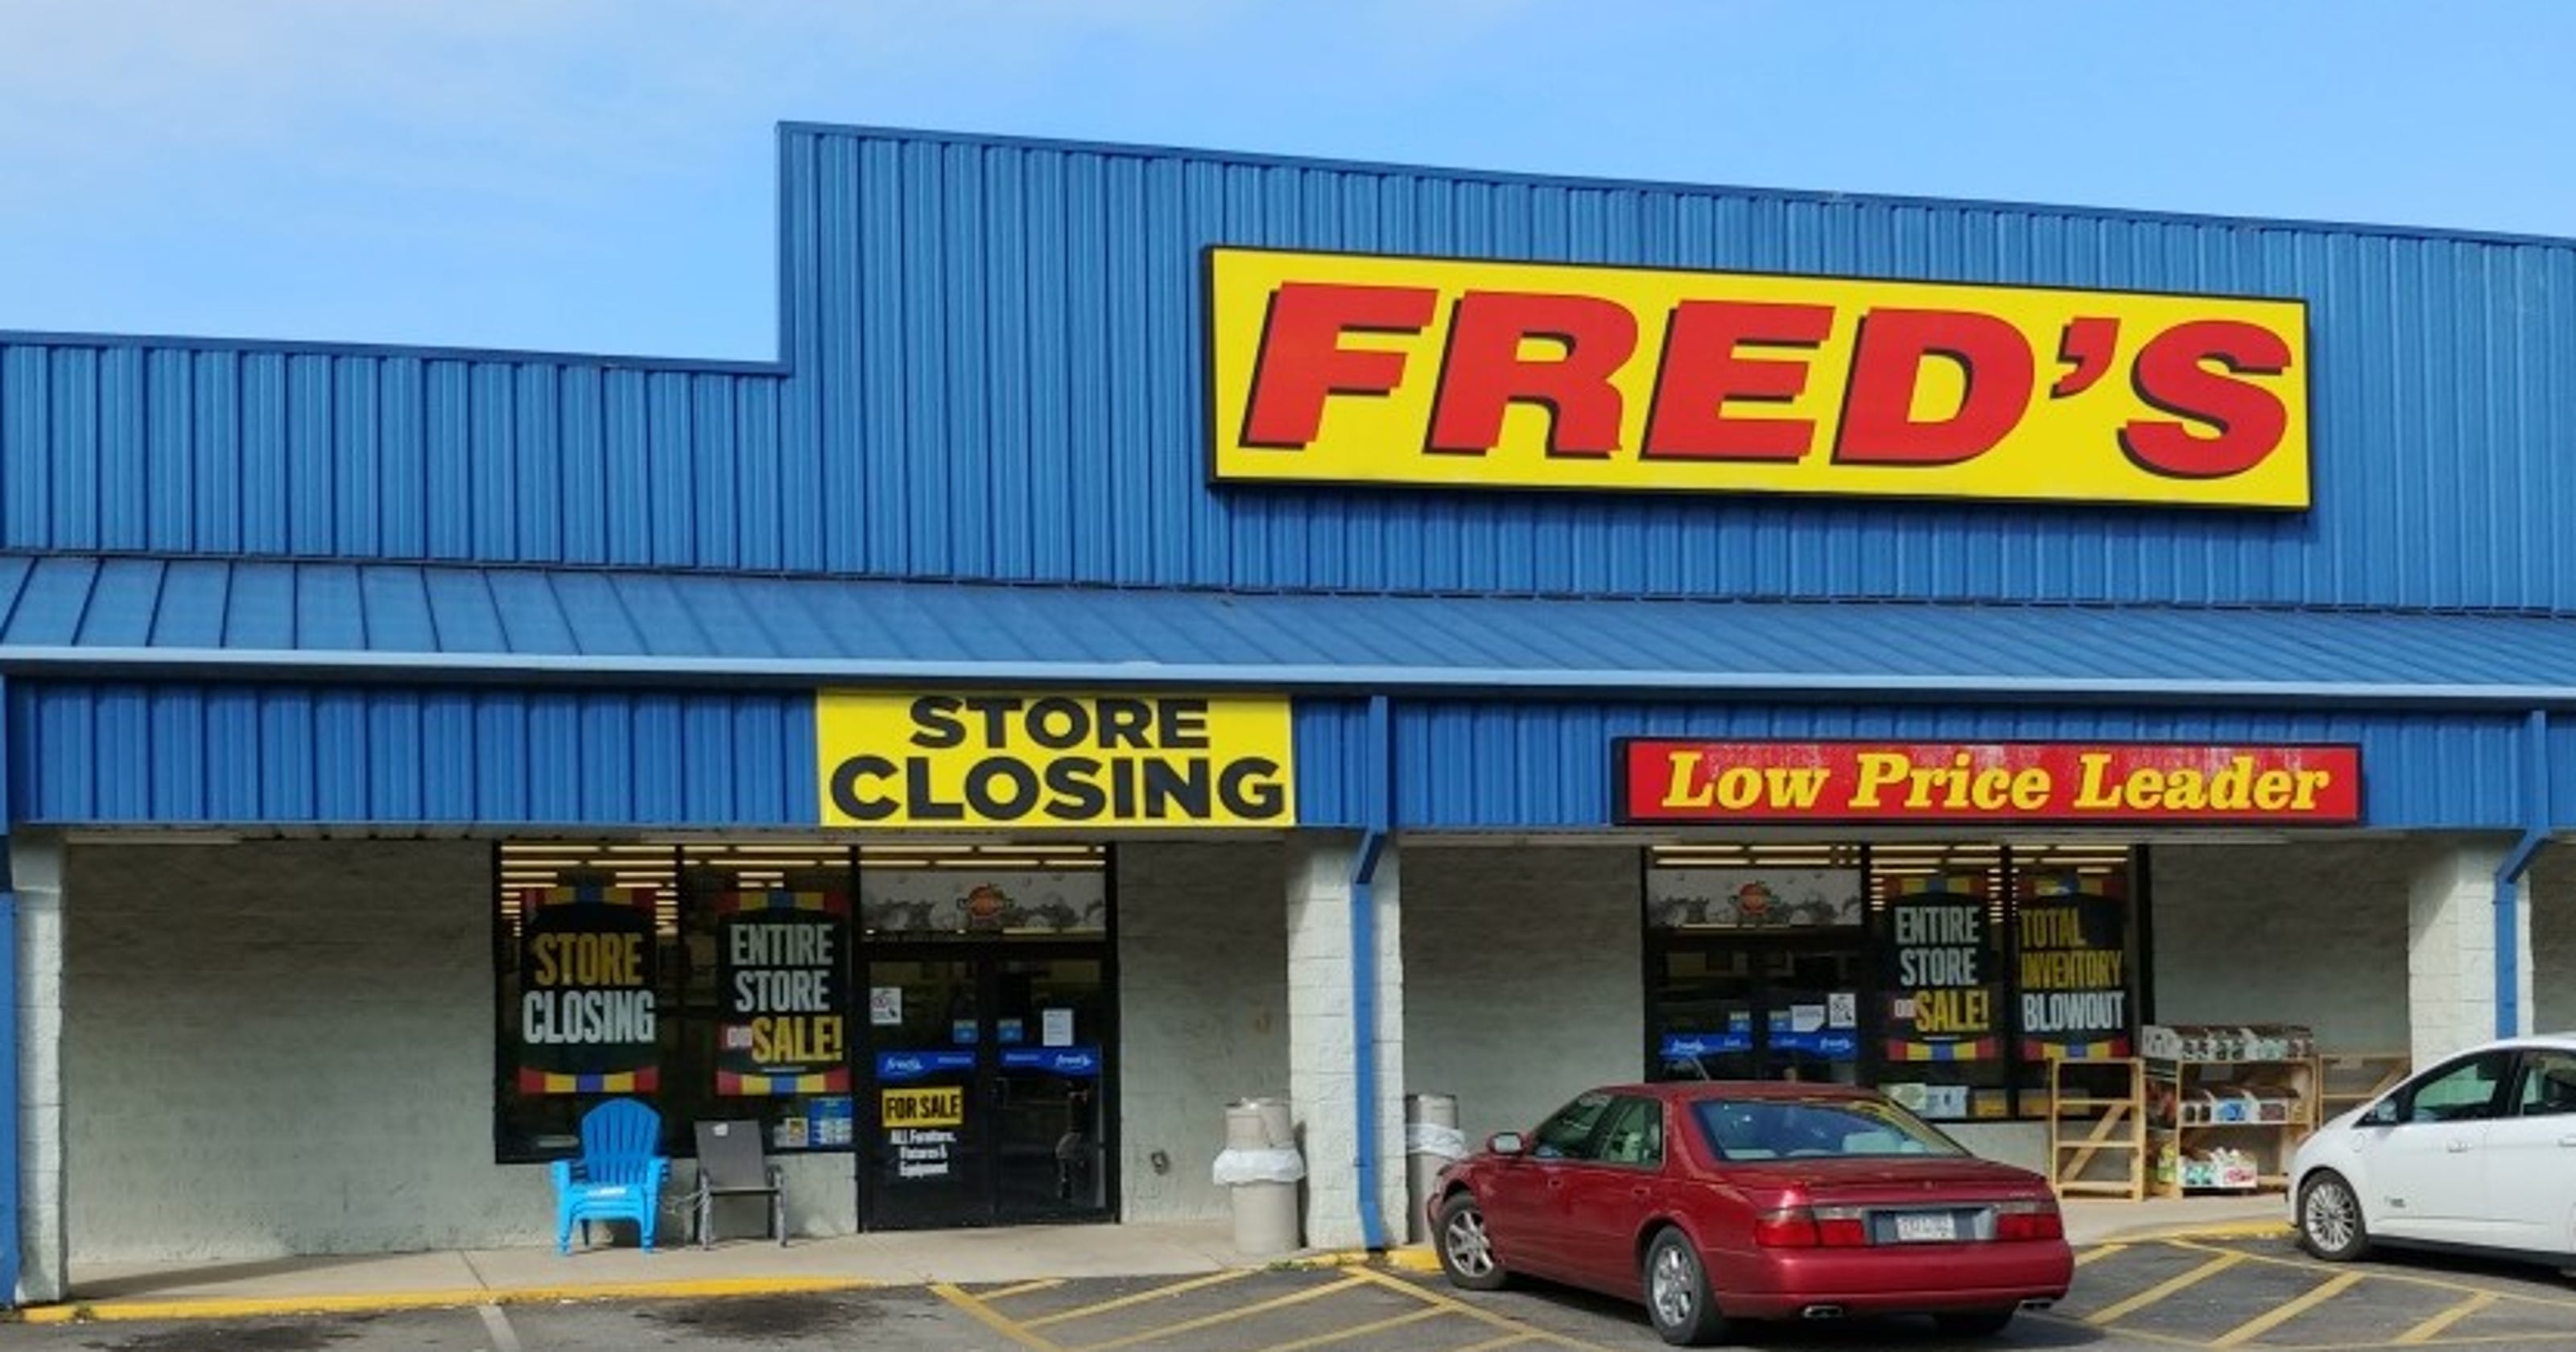 Fred's store closings 2019: See list of 104 stores targeted to shutter2987 x 1680